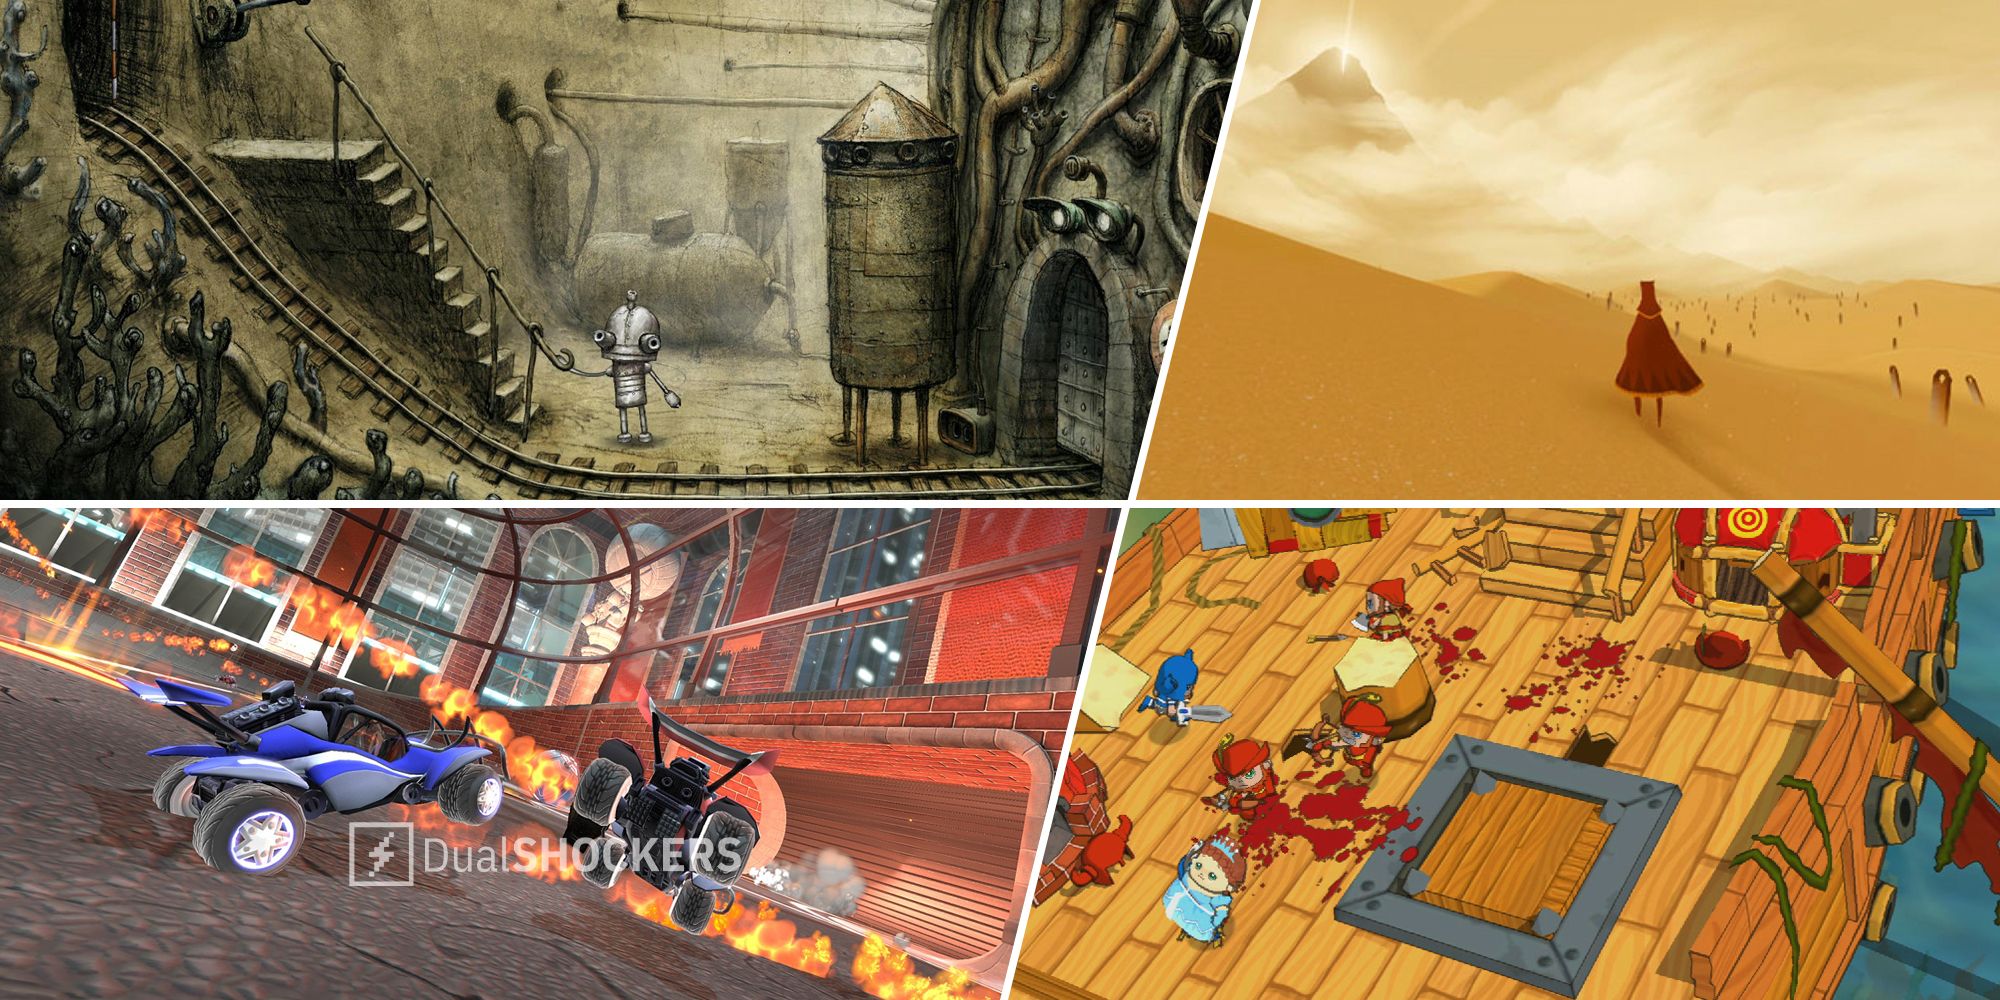 The PS3 Was A Seriously Underrated Goldmine For Indie Games